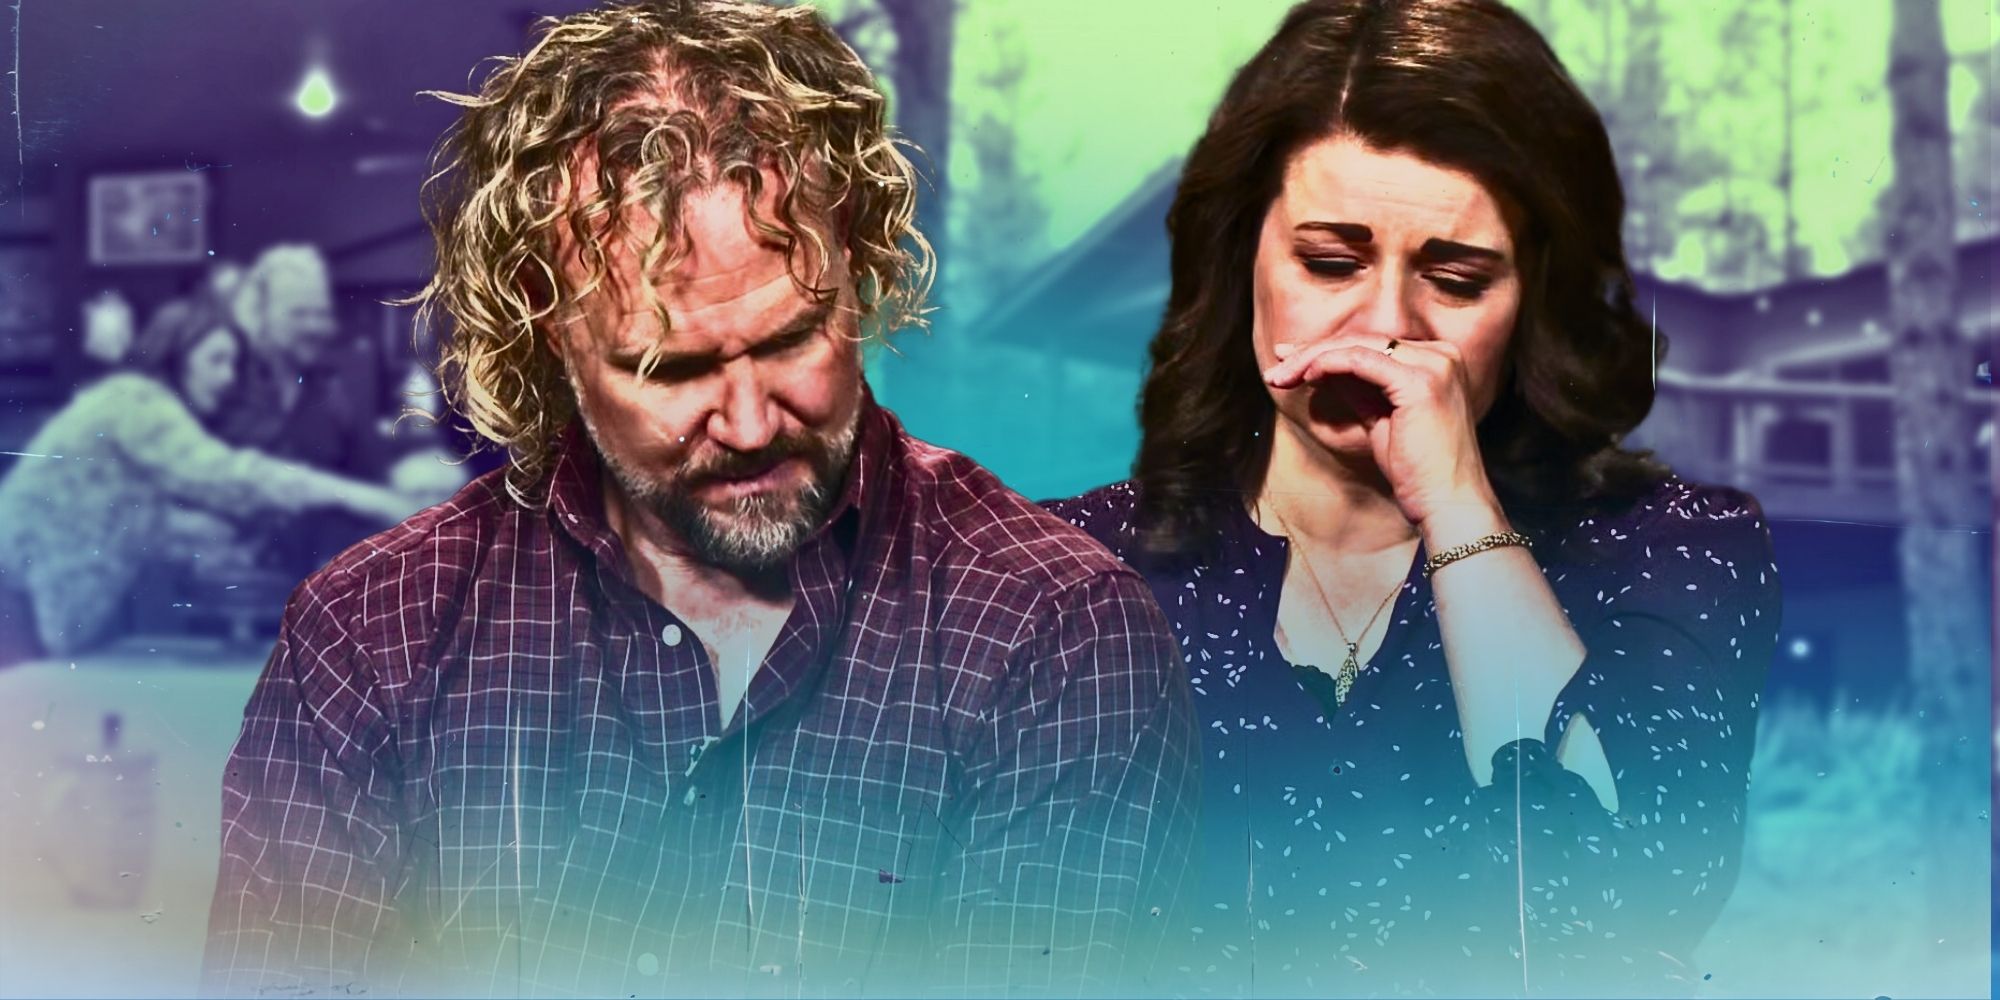 Sister Wives Star Kody Brown Seems “Disgusted” By Robyn’s Crying, According To Fans